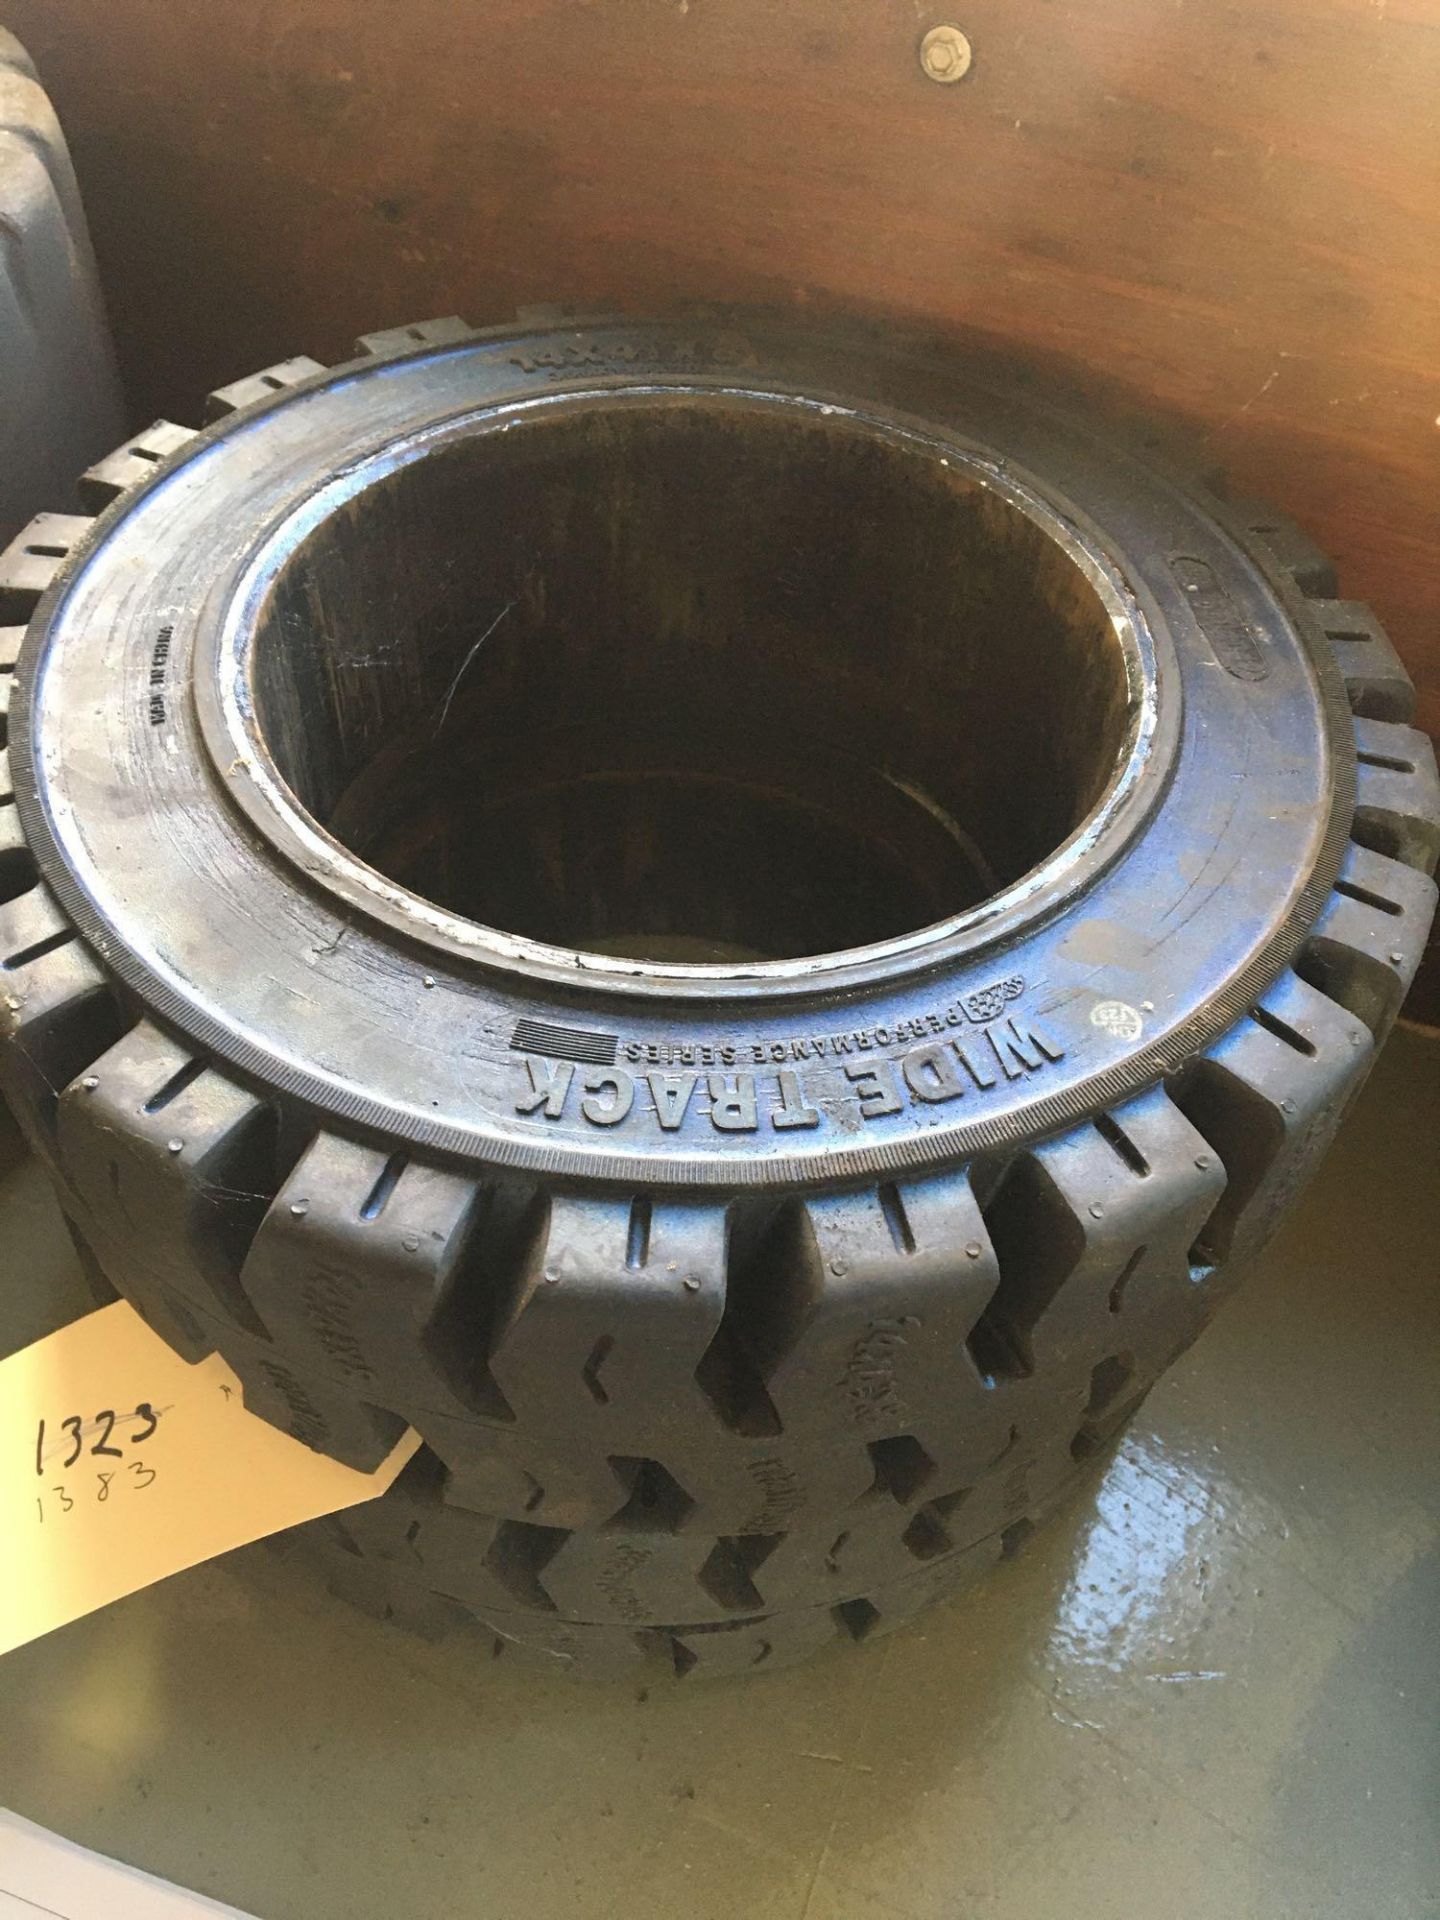 Pair of Tires: Wide Track 14 x 4 1/2 x 8 with Hub